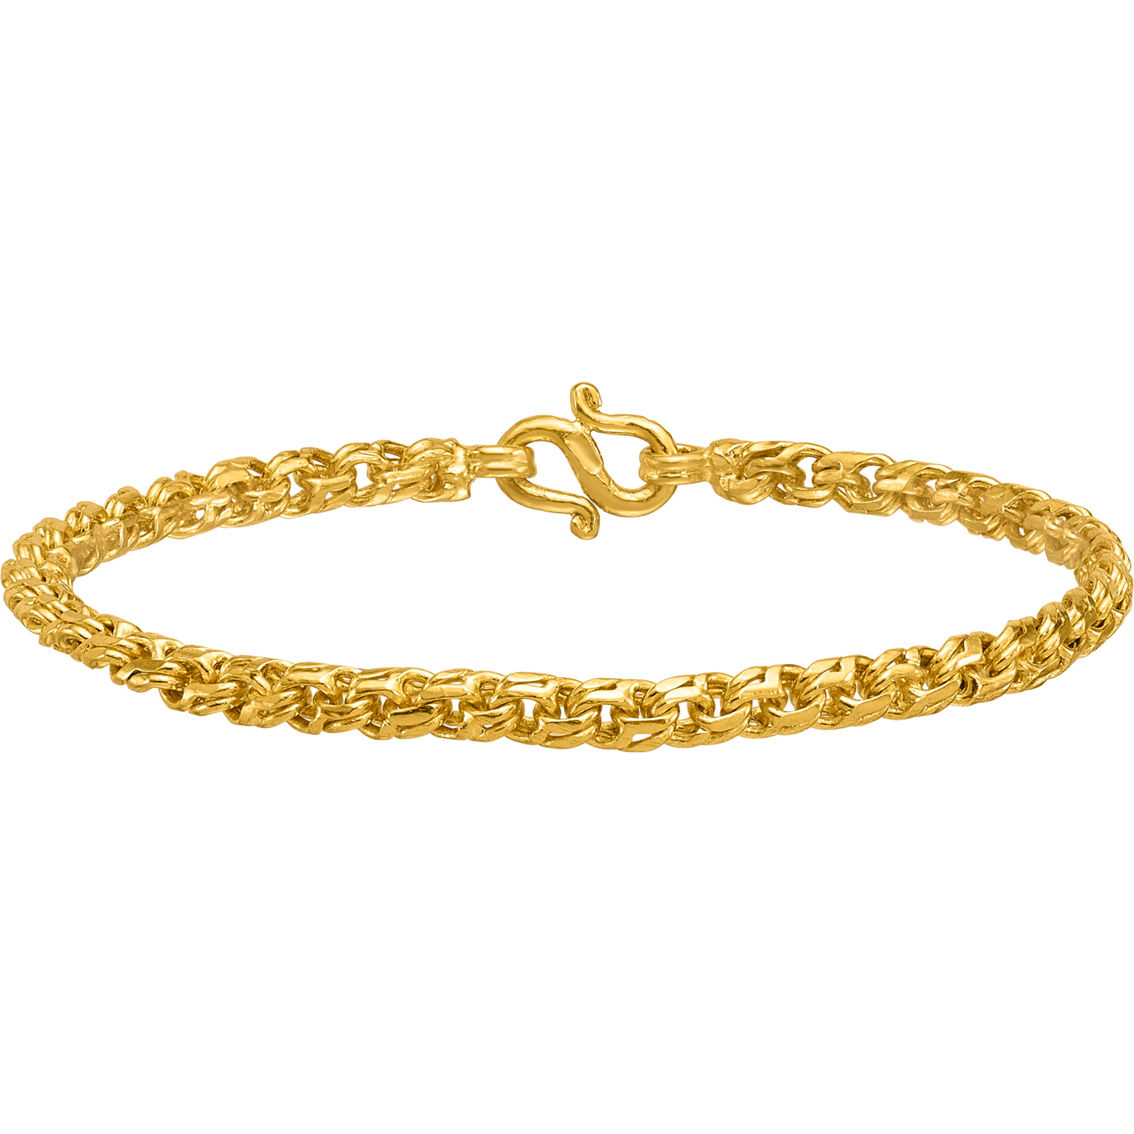 24K Pure Gold 4.4mm Solid Double Interlocking Curb Chain 8 in. Bracelet - Image 2 of 5